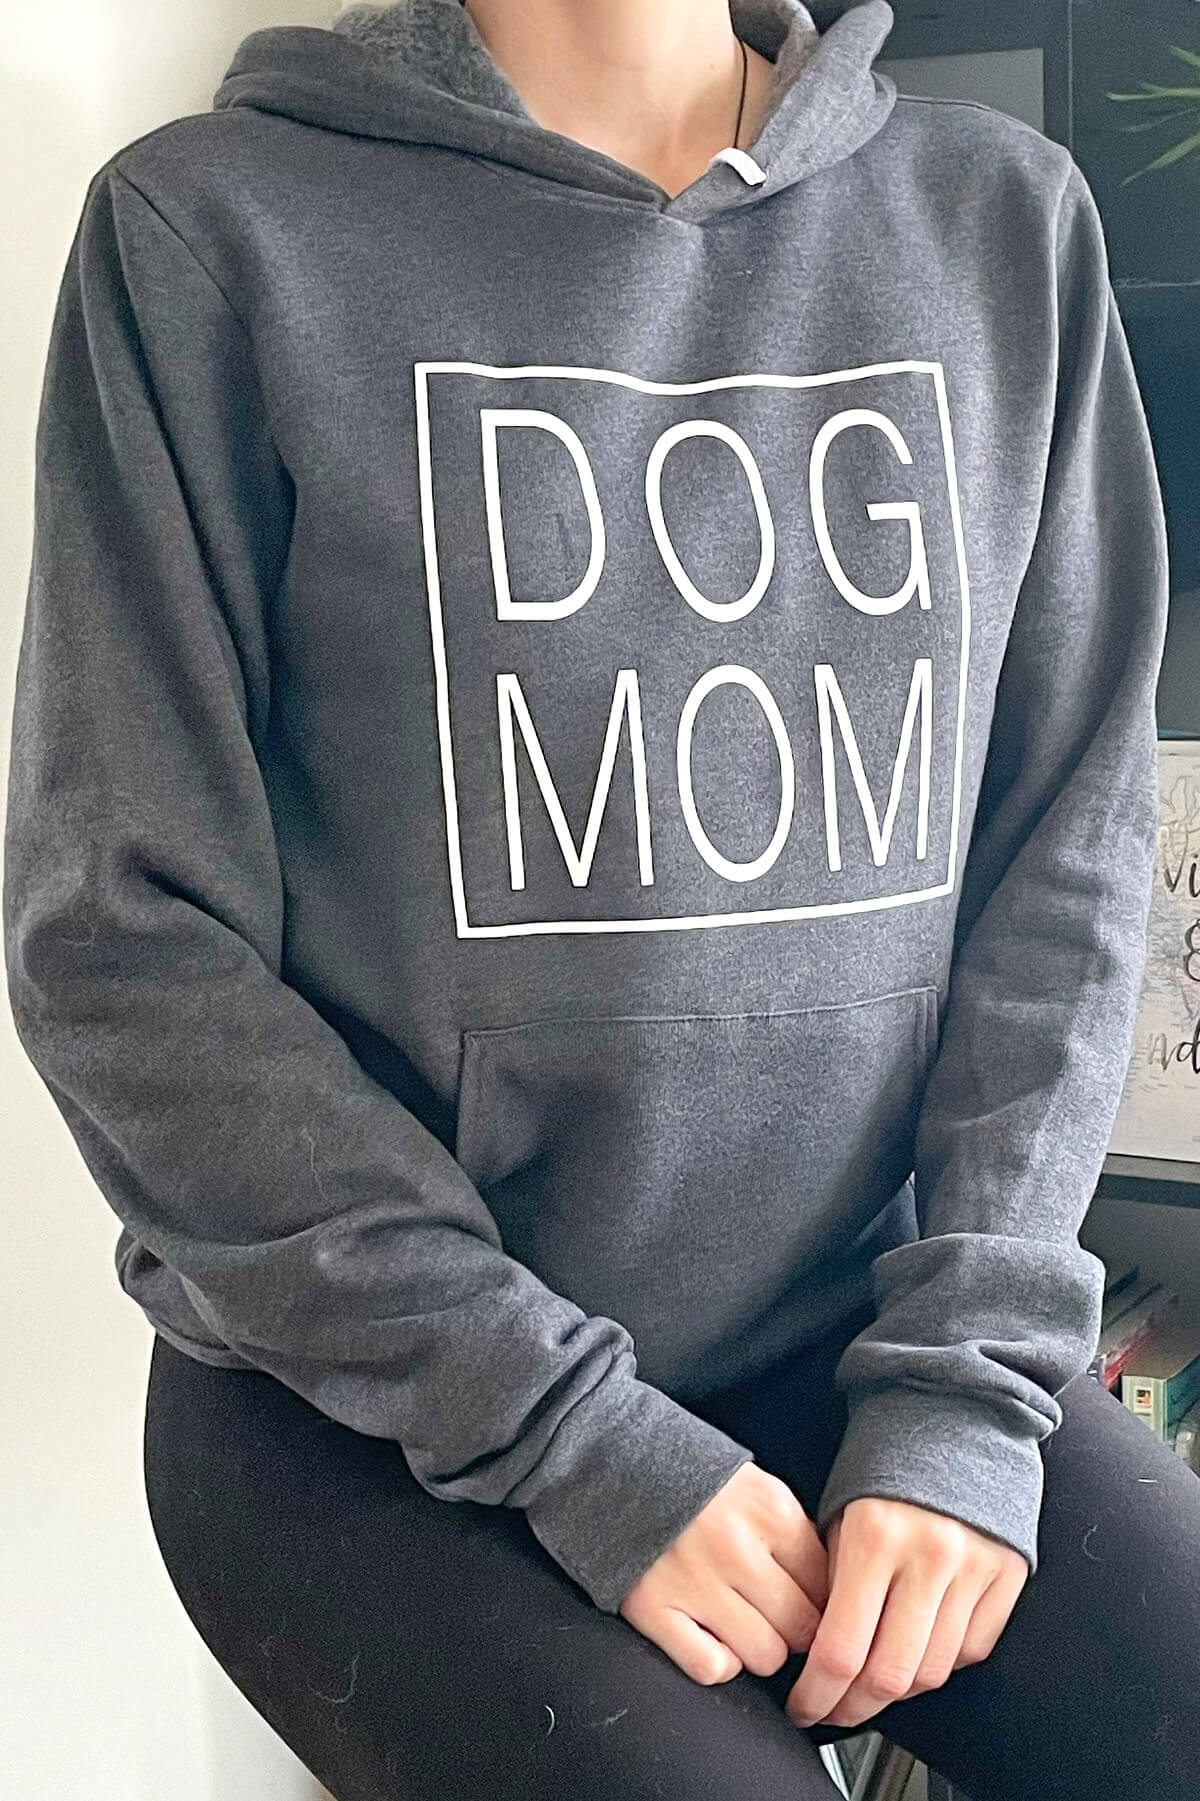 dog mom in all caps in a rectangle on a grey hooded sweatshirt